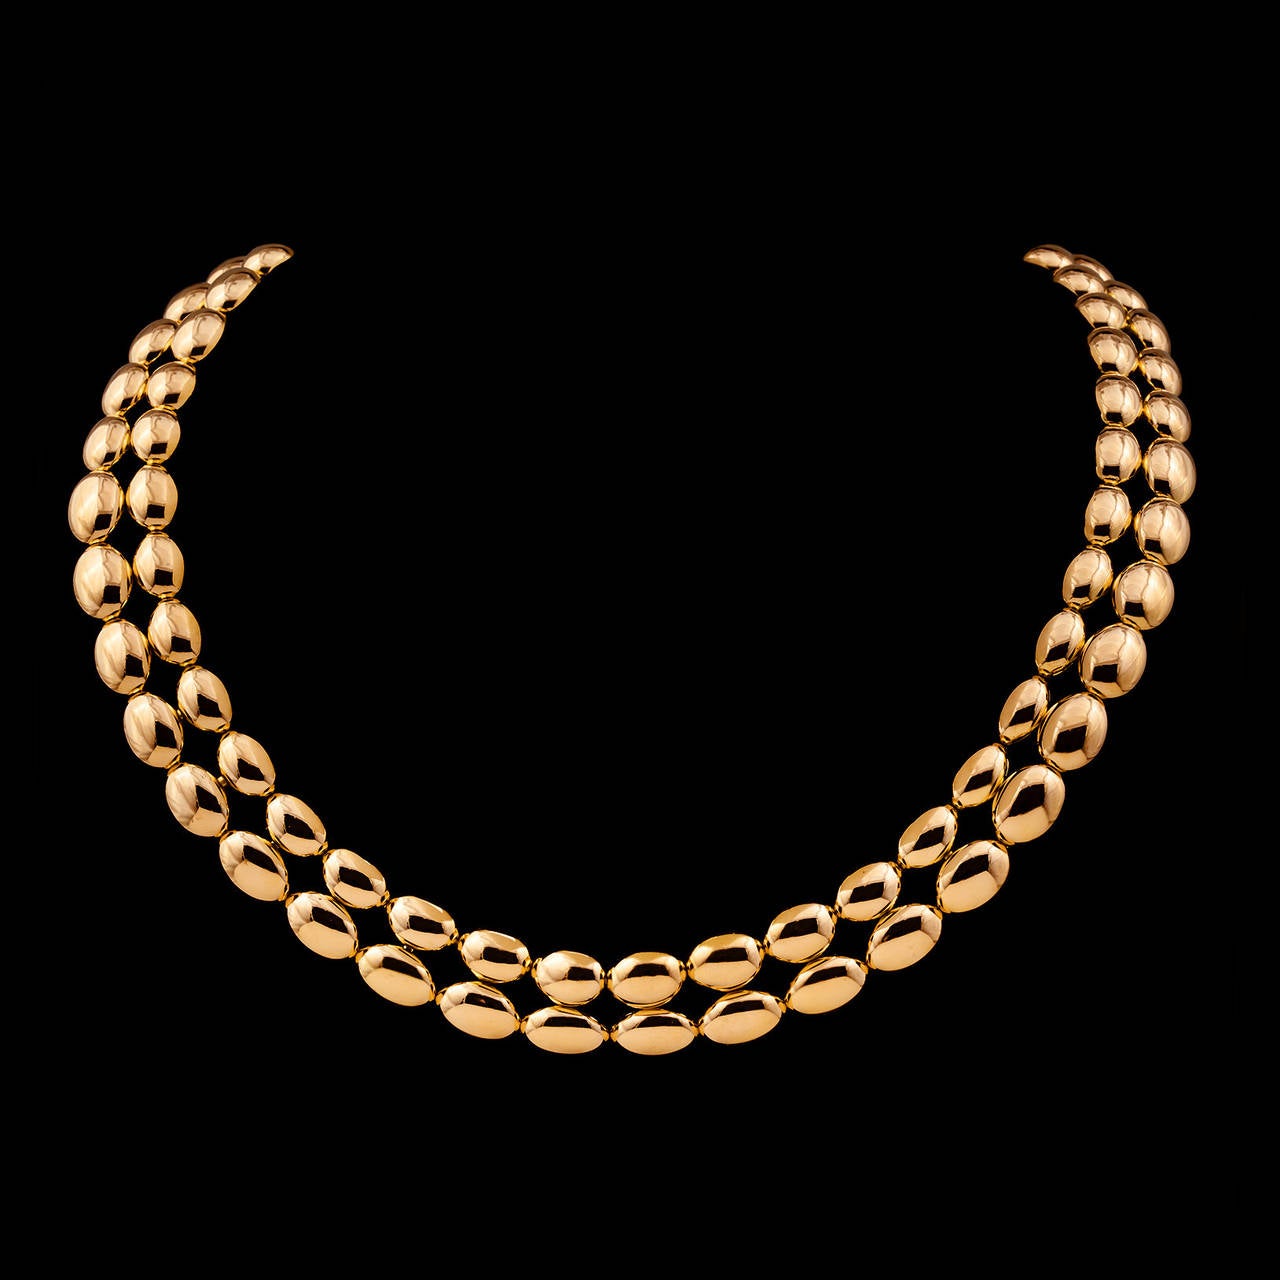 Chaumet 18Kt Yellow Gold Necklace Features 2 Rows of High Polish Yellow Gold Domed Ovals in a Simple and Powerful Design. The necklace measures 16.5 inches long and 19mm wide. This piece totals 122.5 grams.